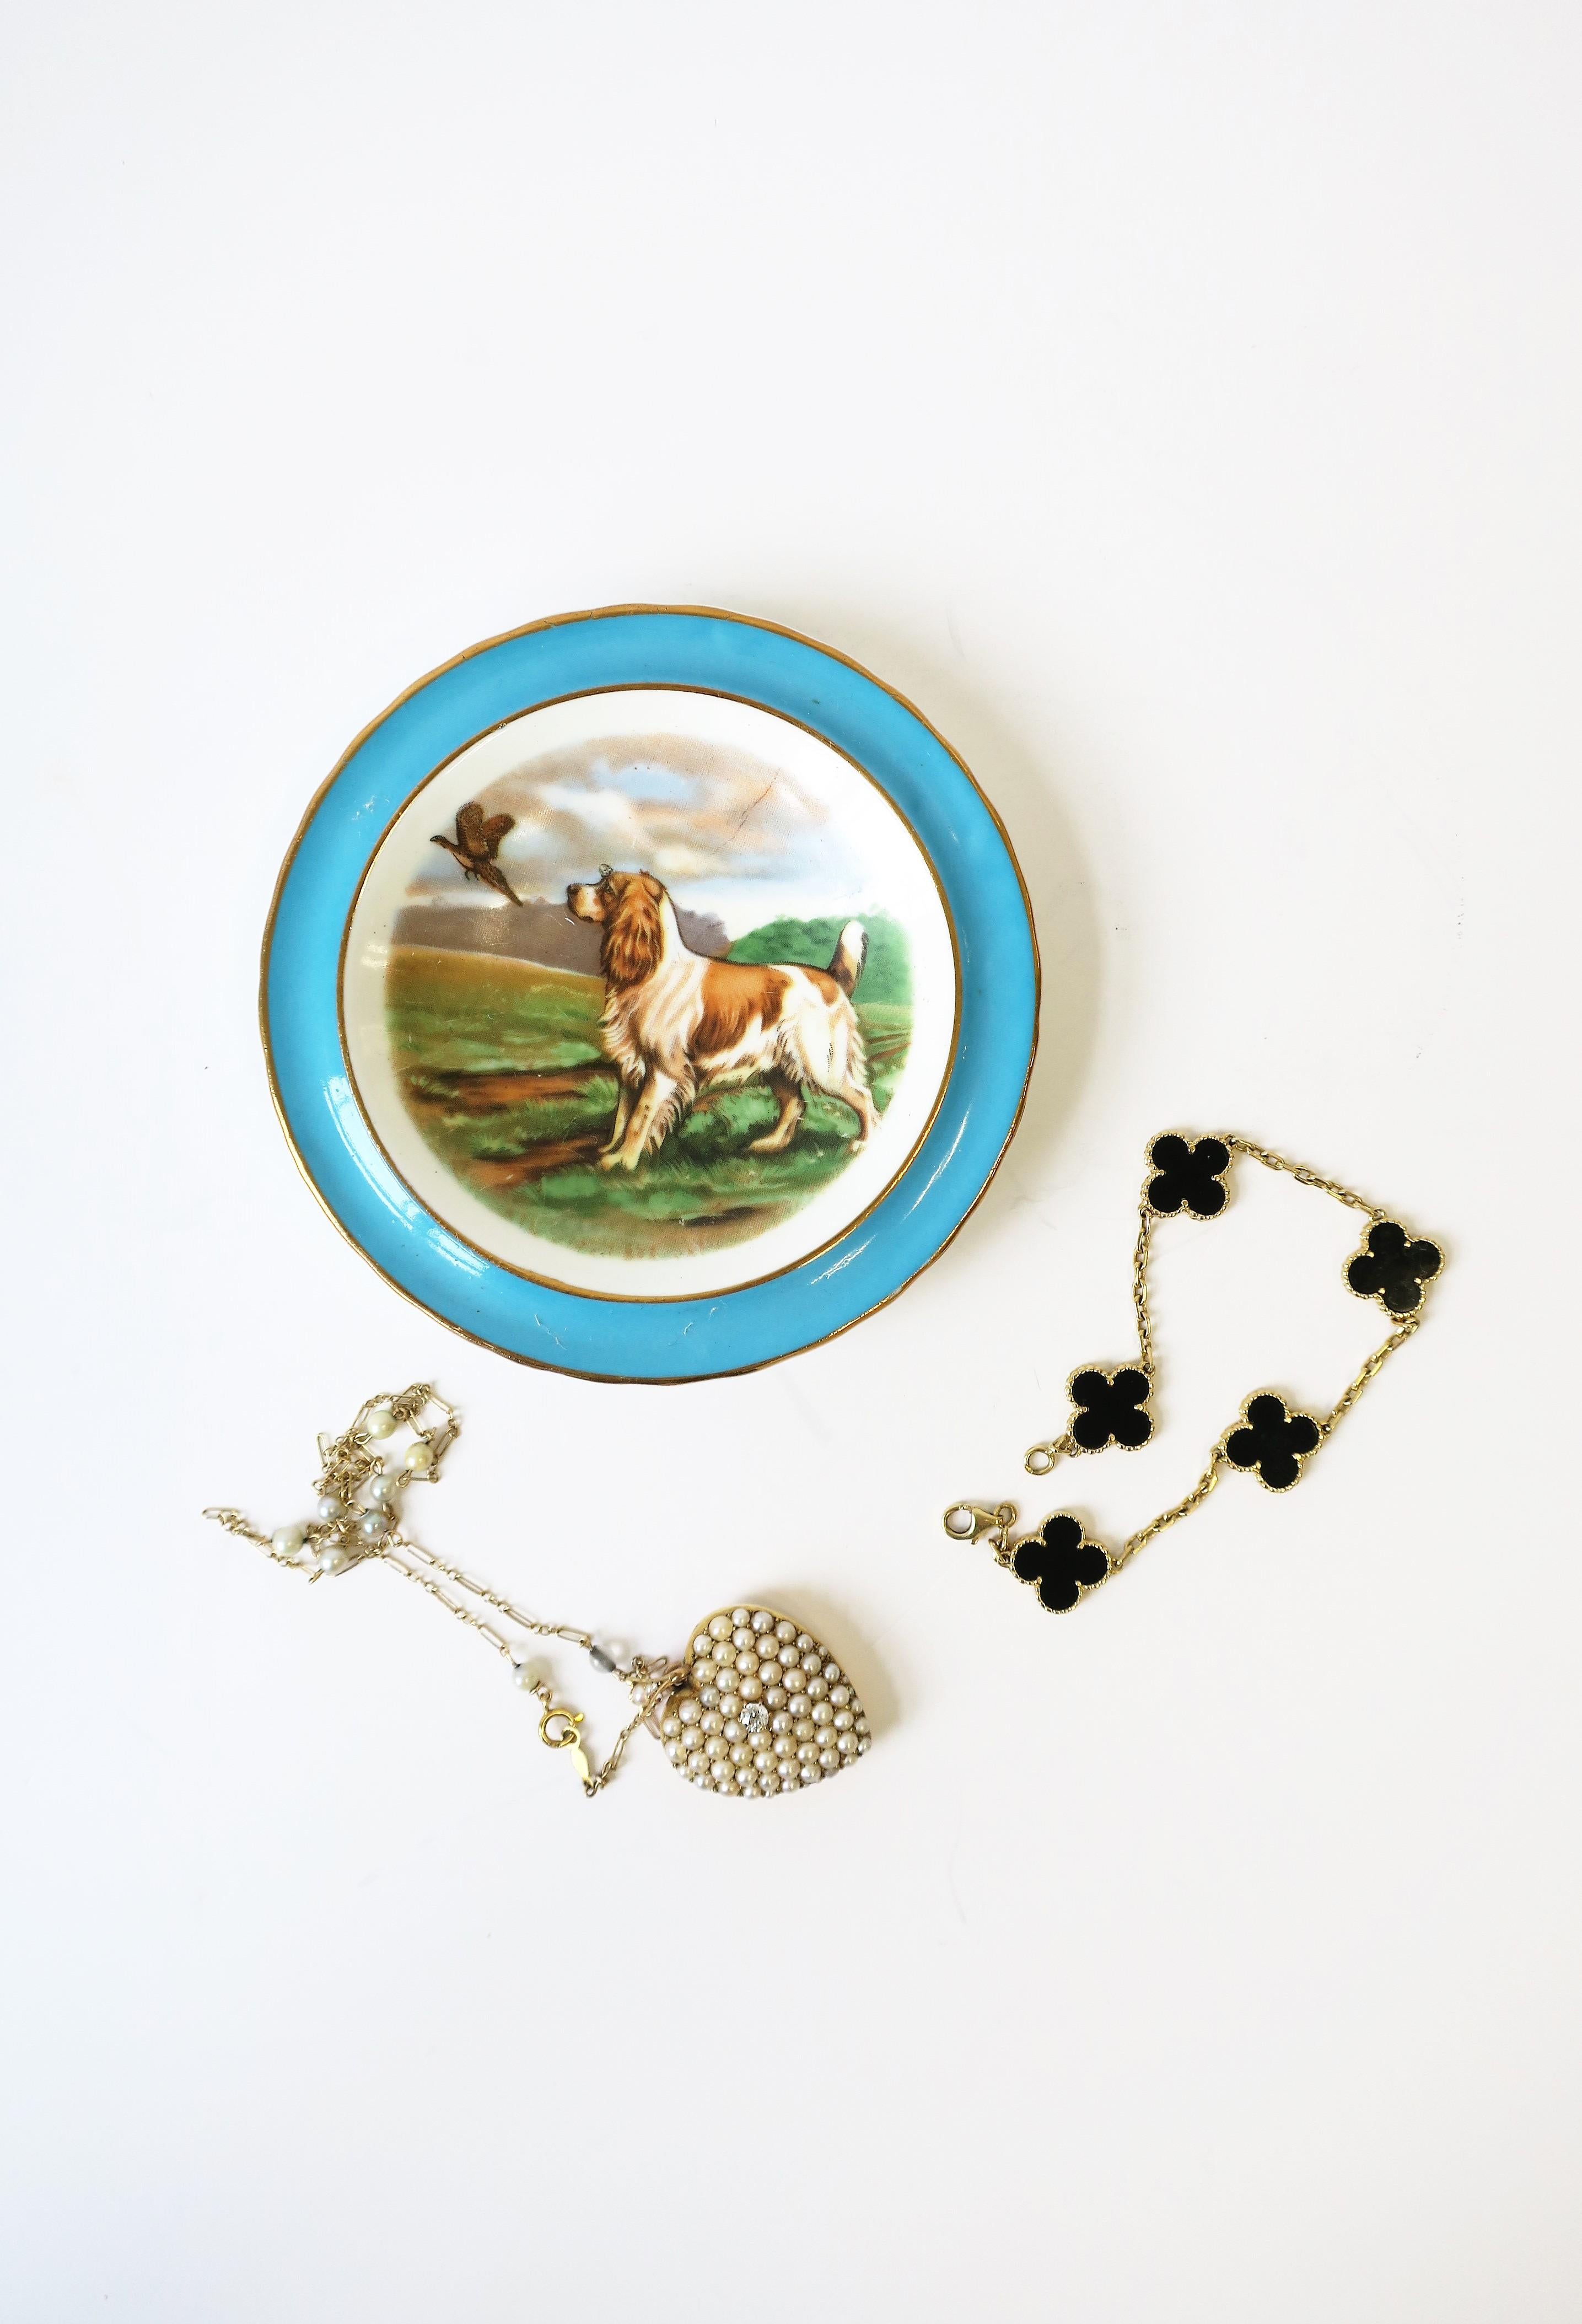 20th Century English Blue and White Porcelain Jewelry Dish with Spaniel Dog and Bird